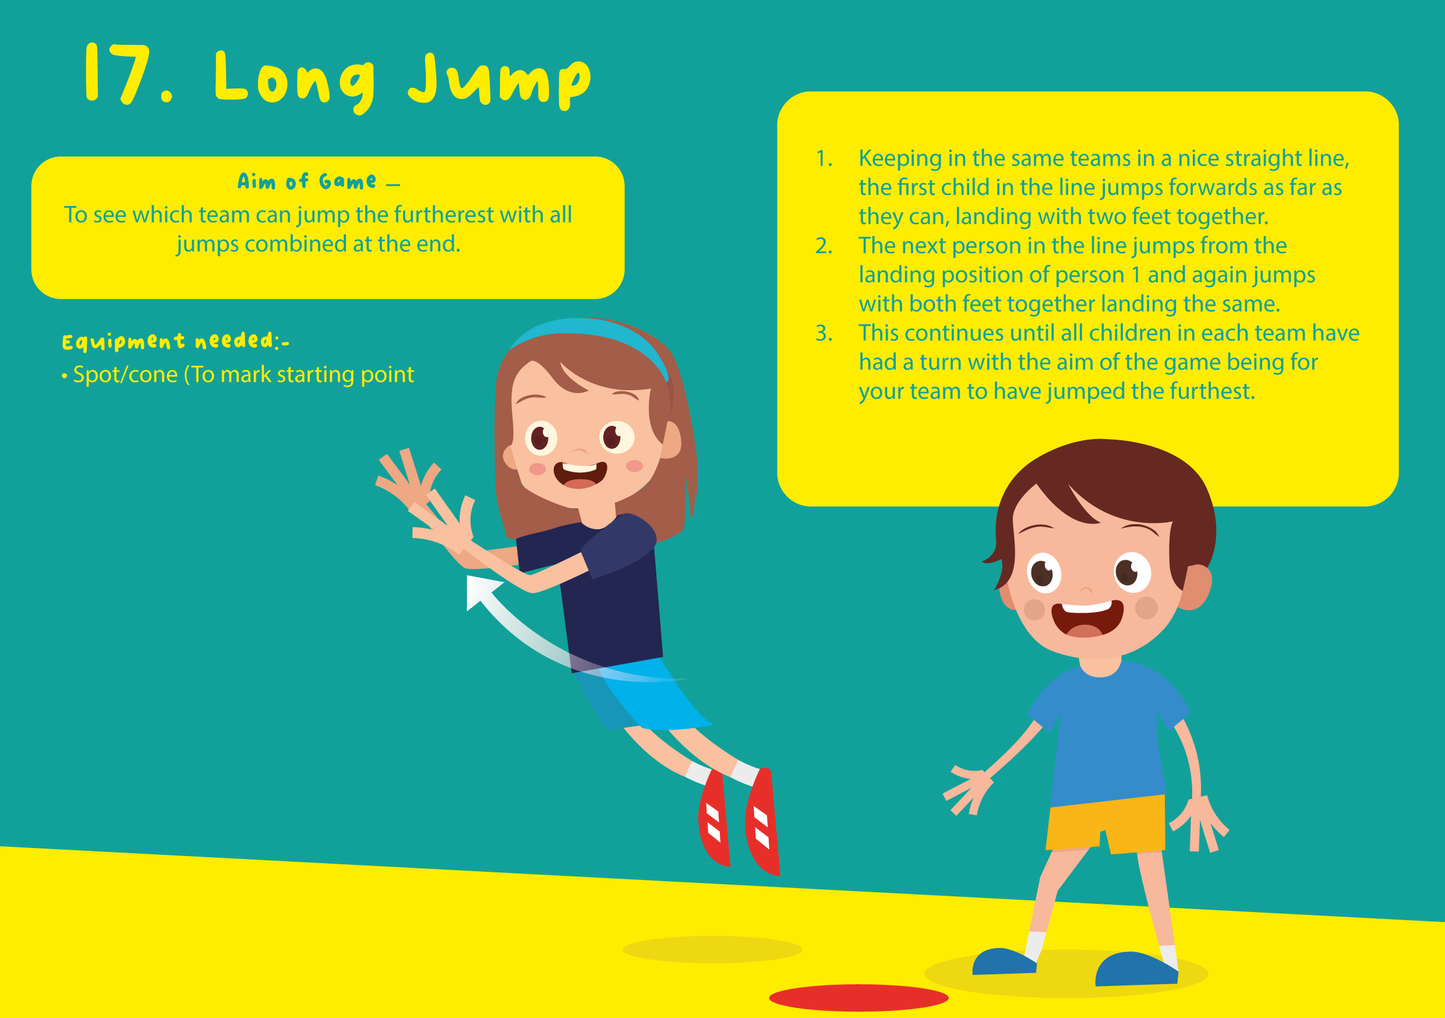 Long Jump team game rules. Jump as far as your team can to win the challenge